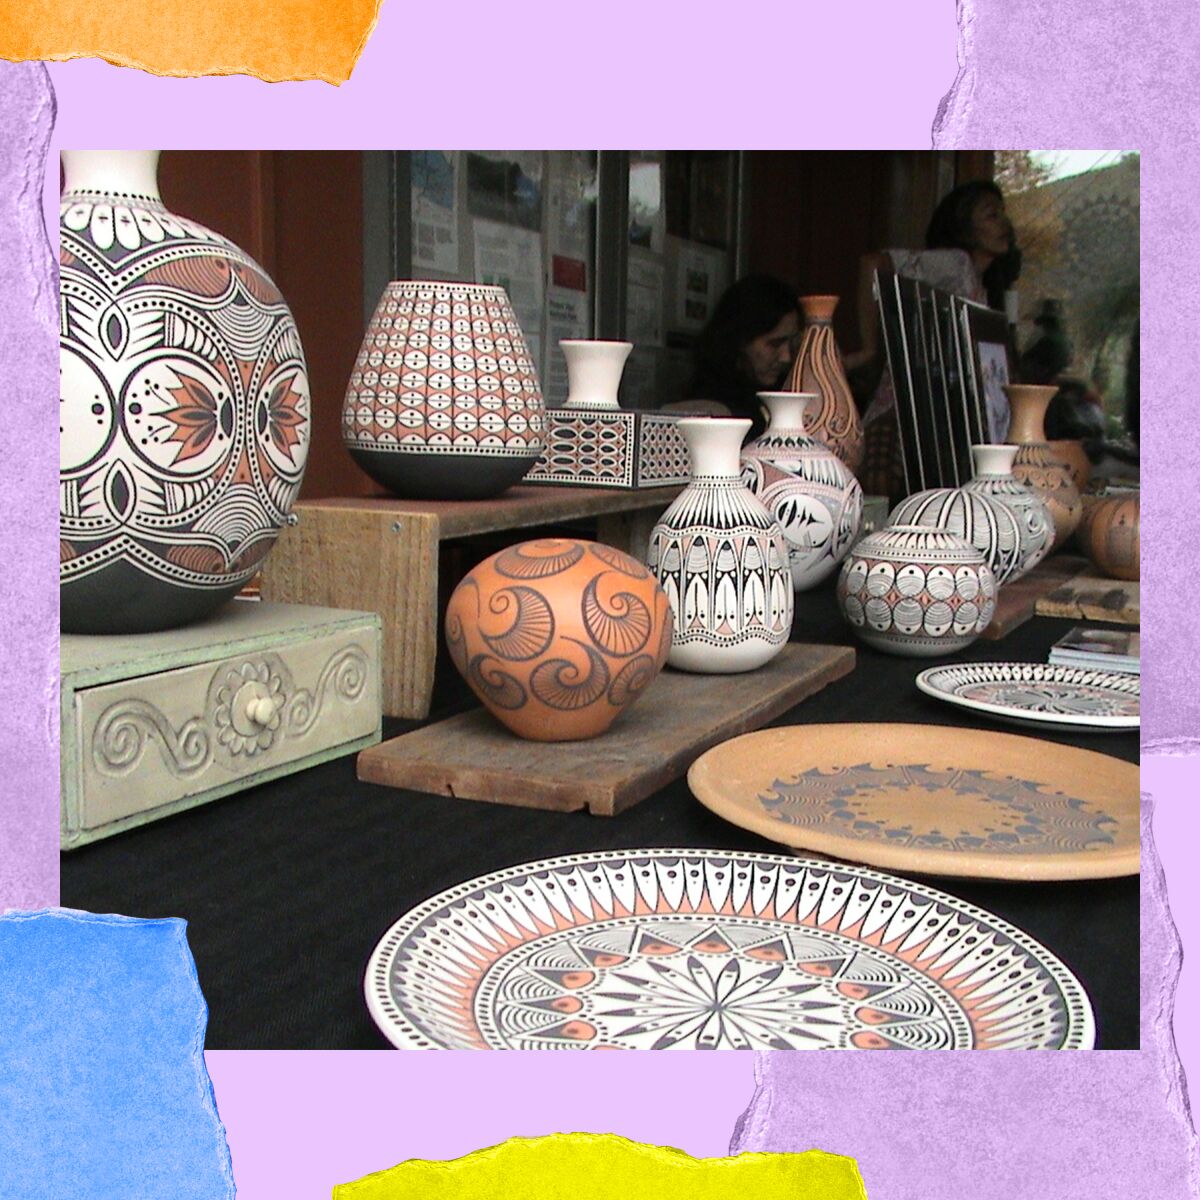 An assortment of bowls, plates, and pots that are among the winter solstice pottery for purchase